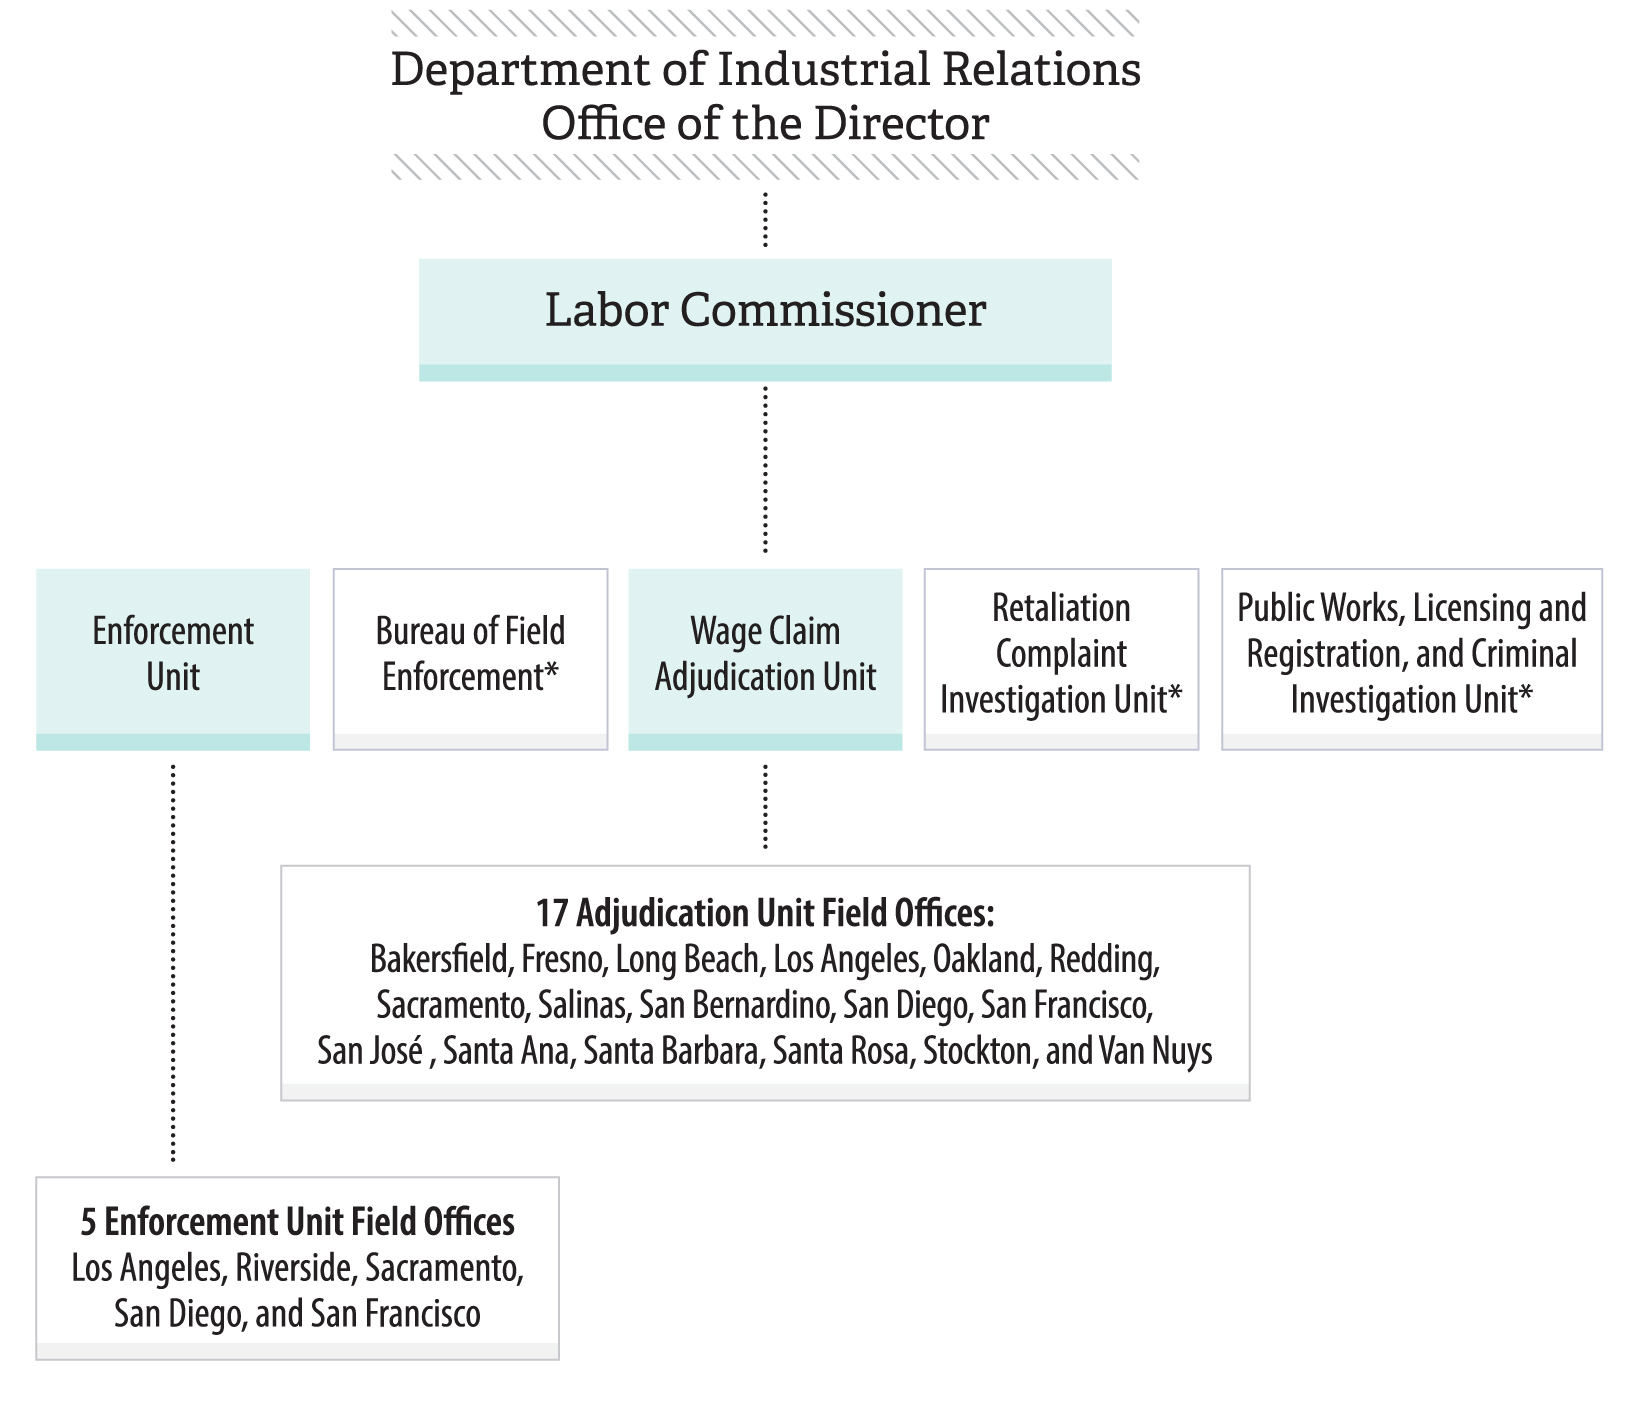 An organization chart illustrating the Director of Industrial Relations’ authority over various units and field offices.